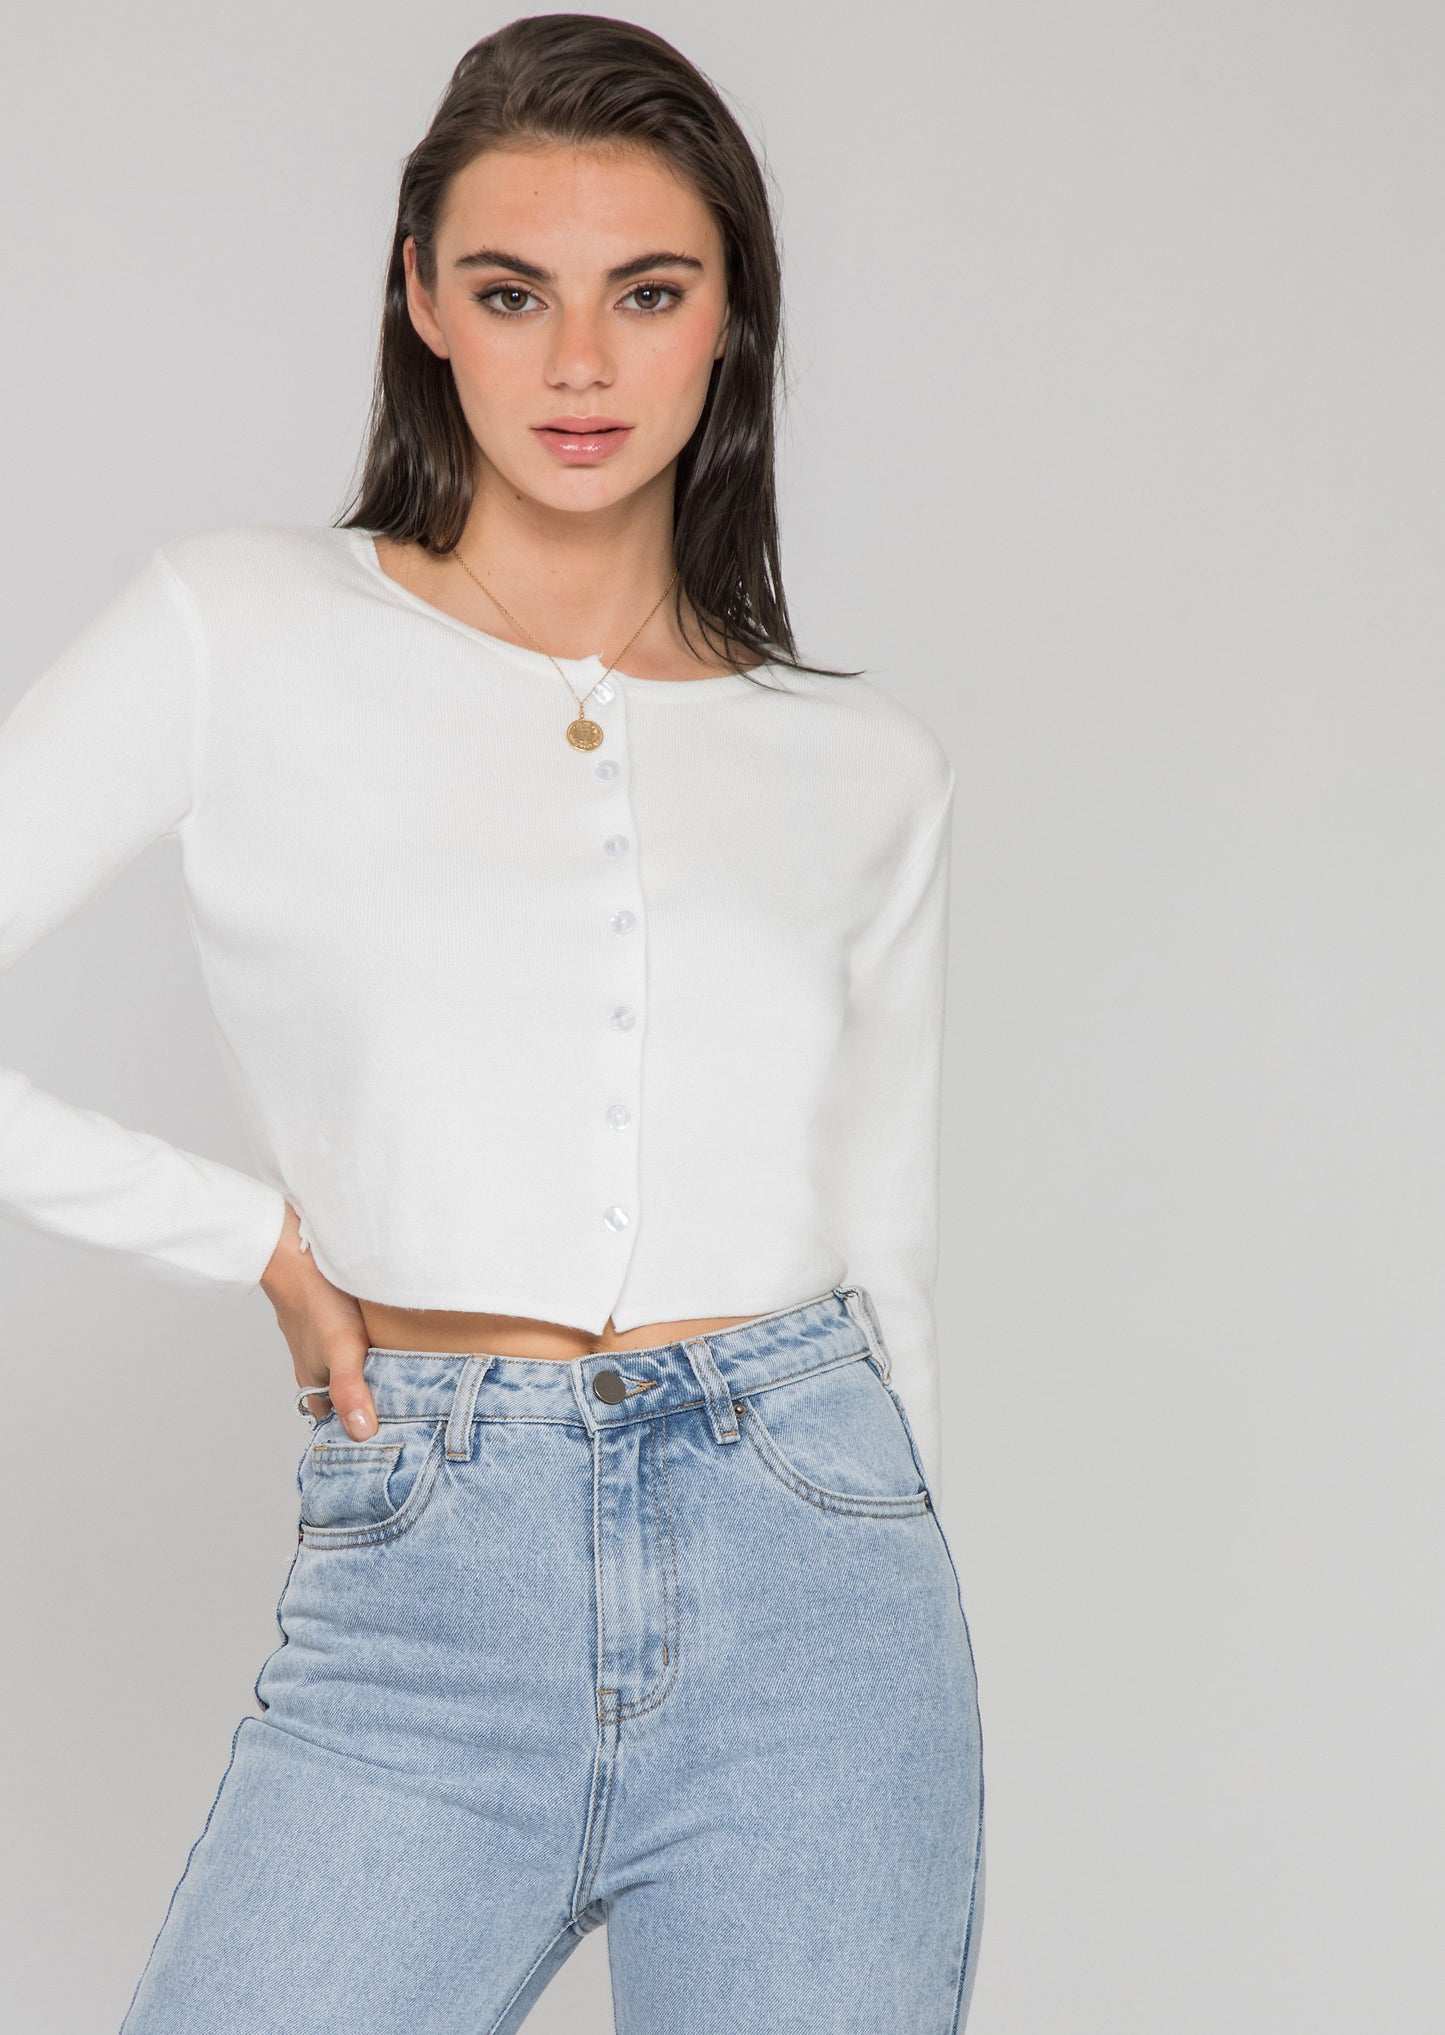 Cropped cardigan in white